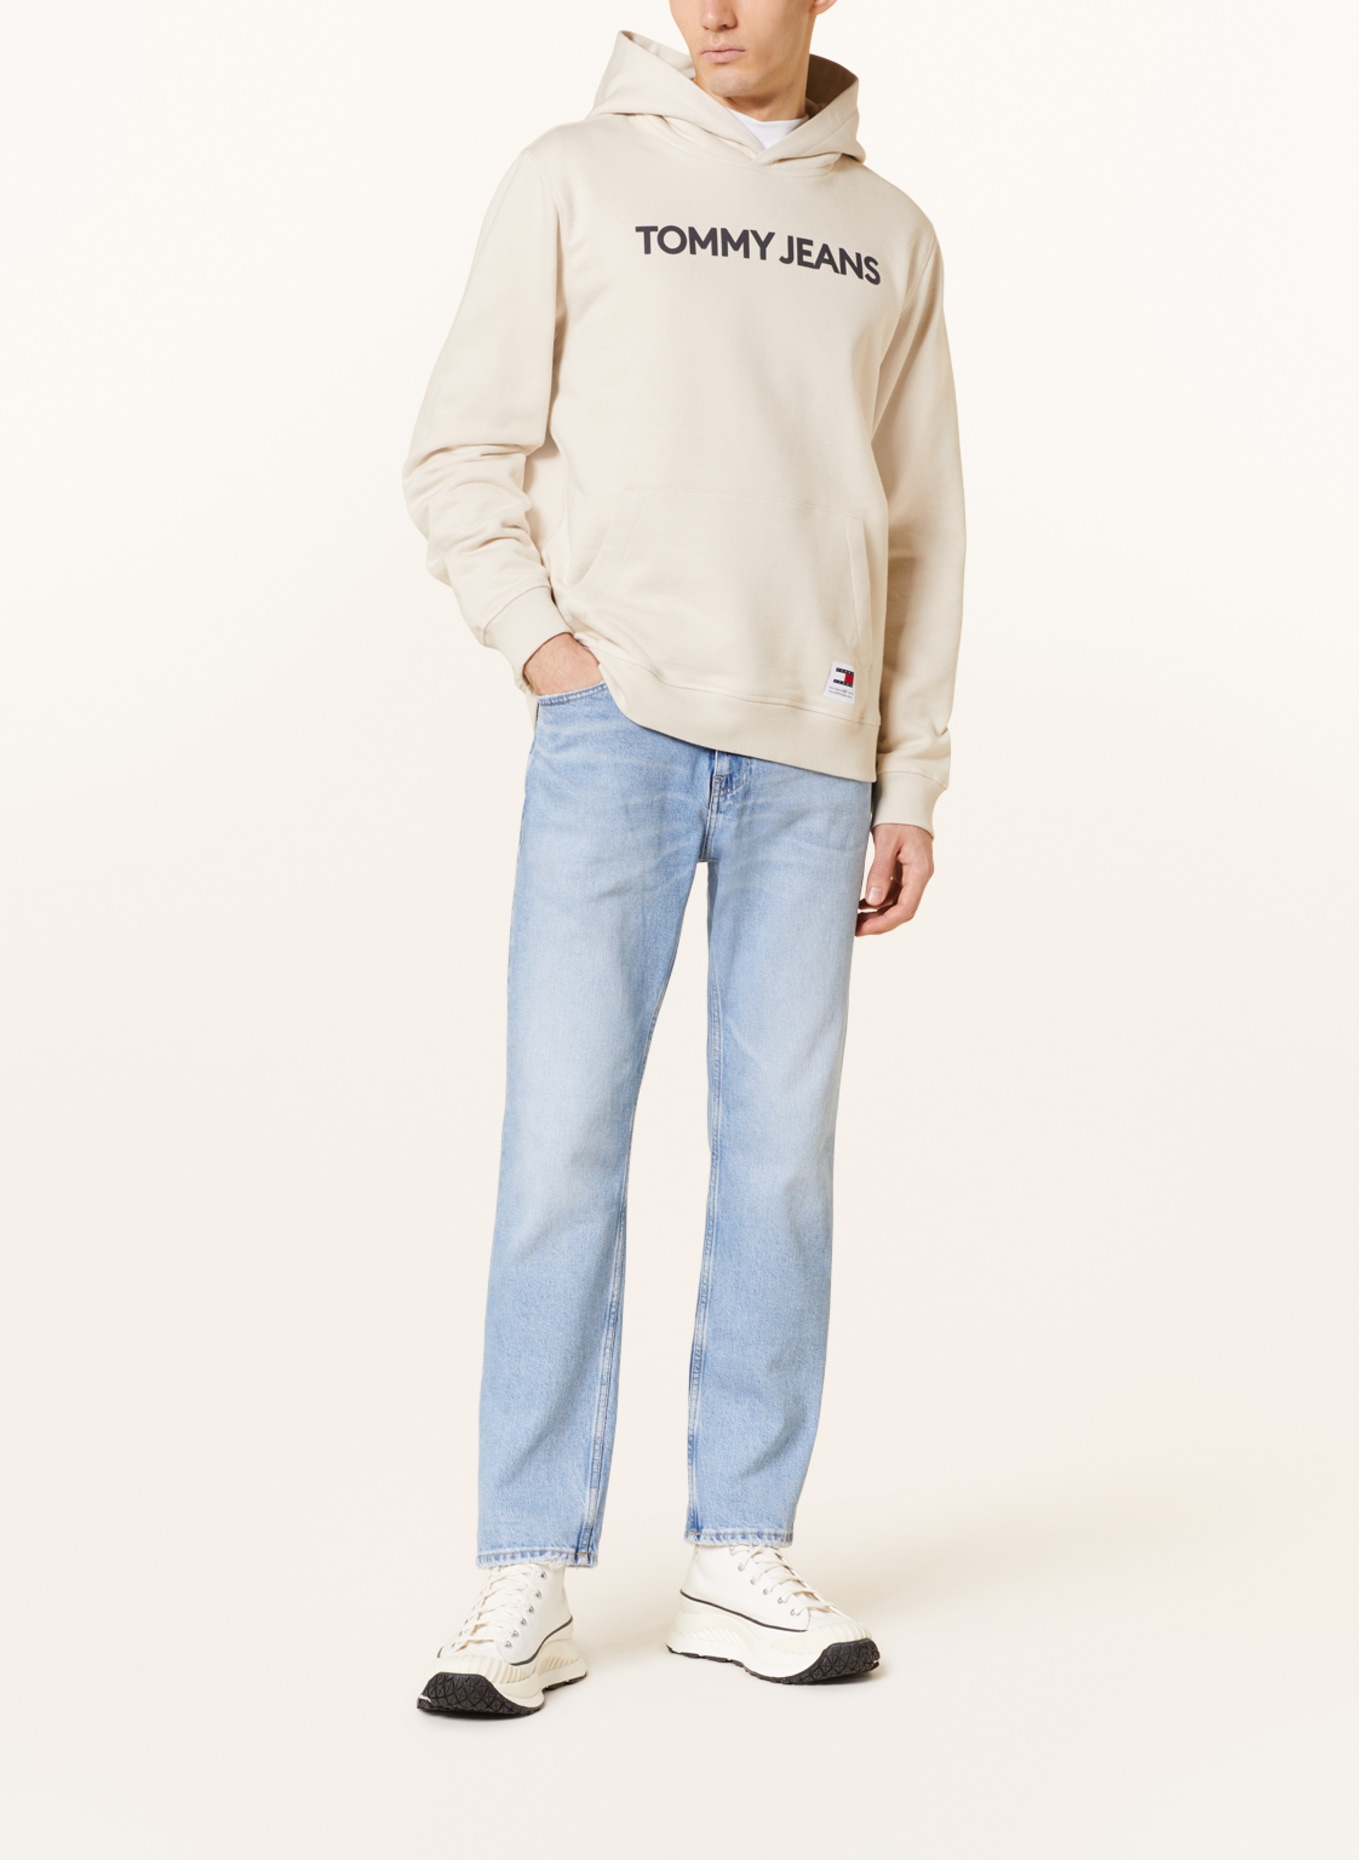 TOMMY JEANS Jeans ETHAN Straight Fit, Farbe: 1AB Denim Light (Bild 2)